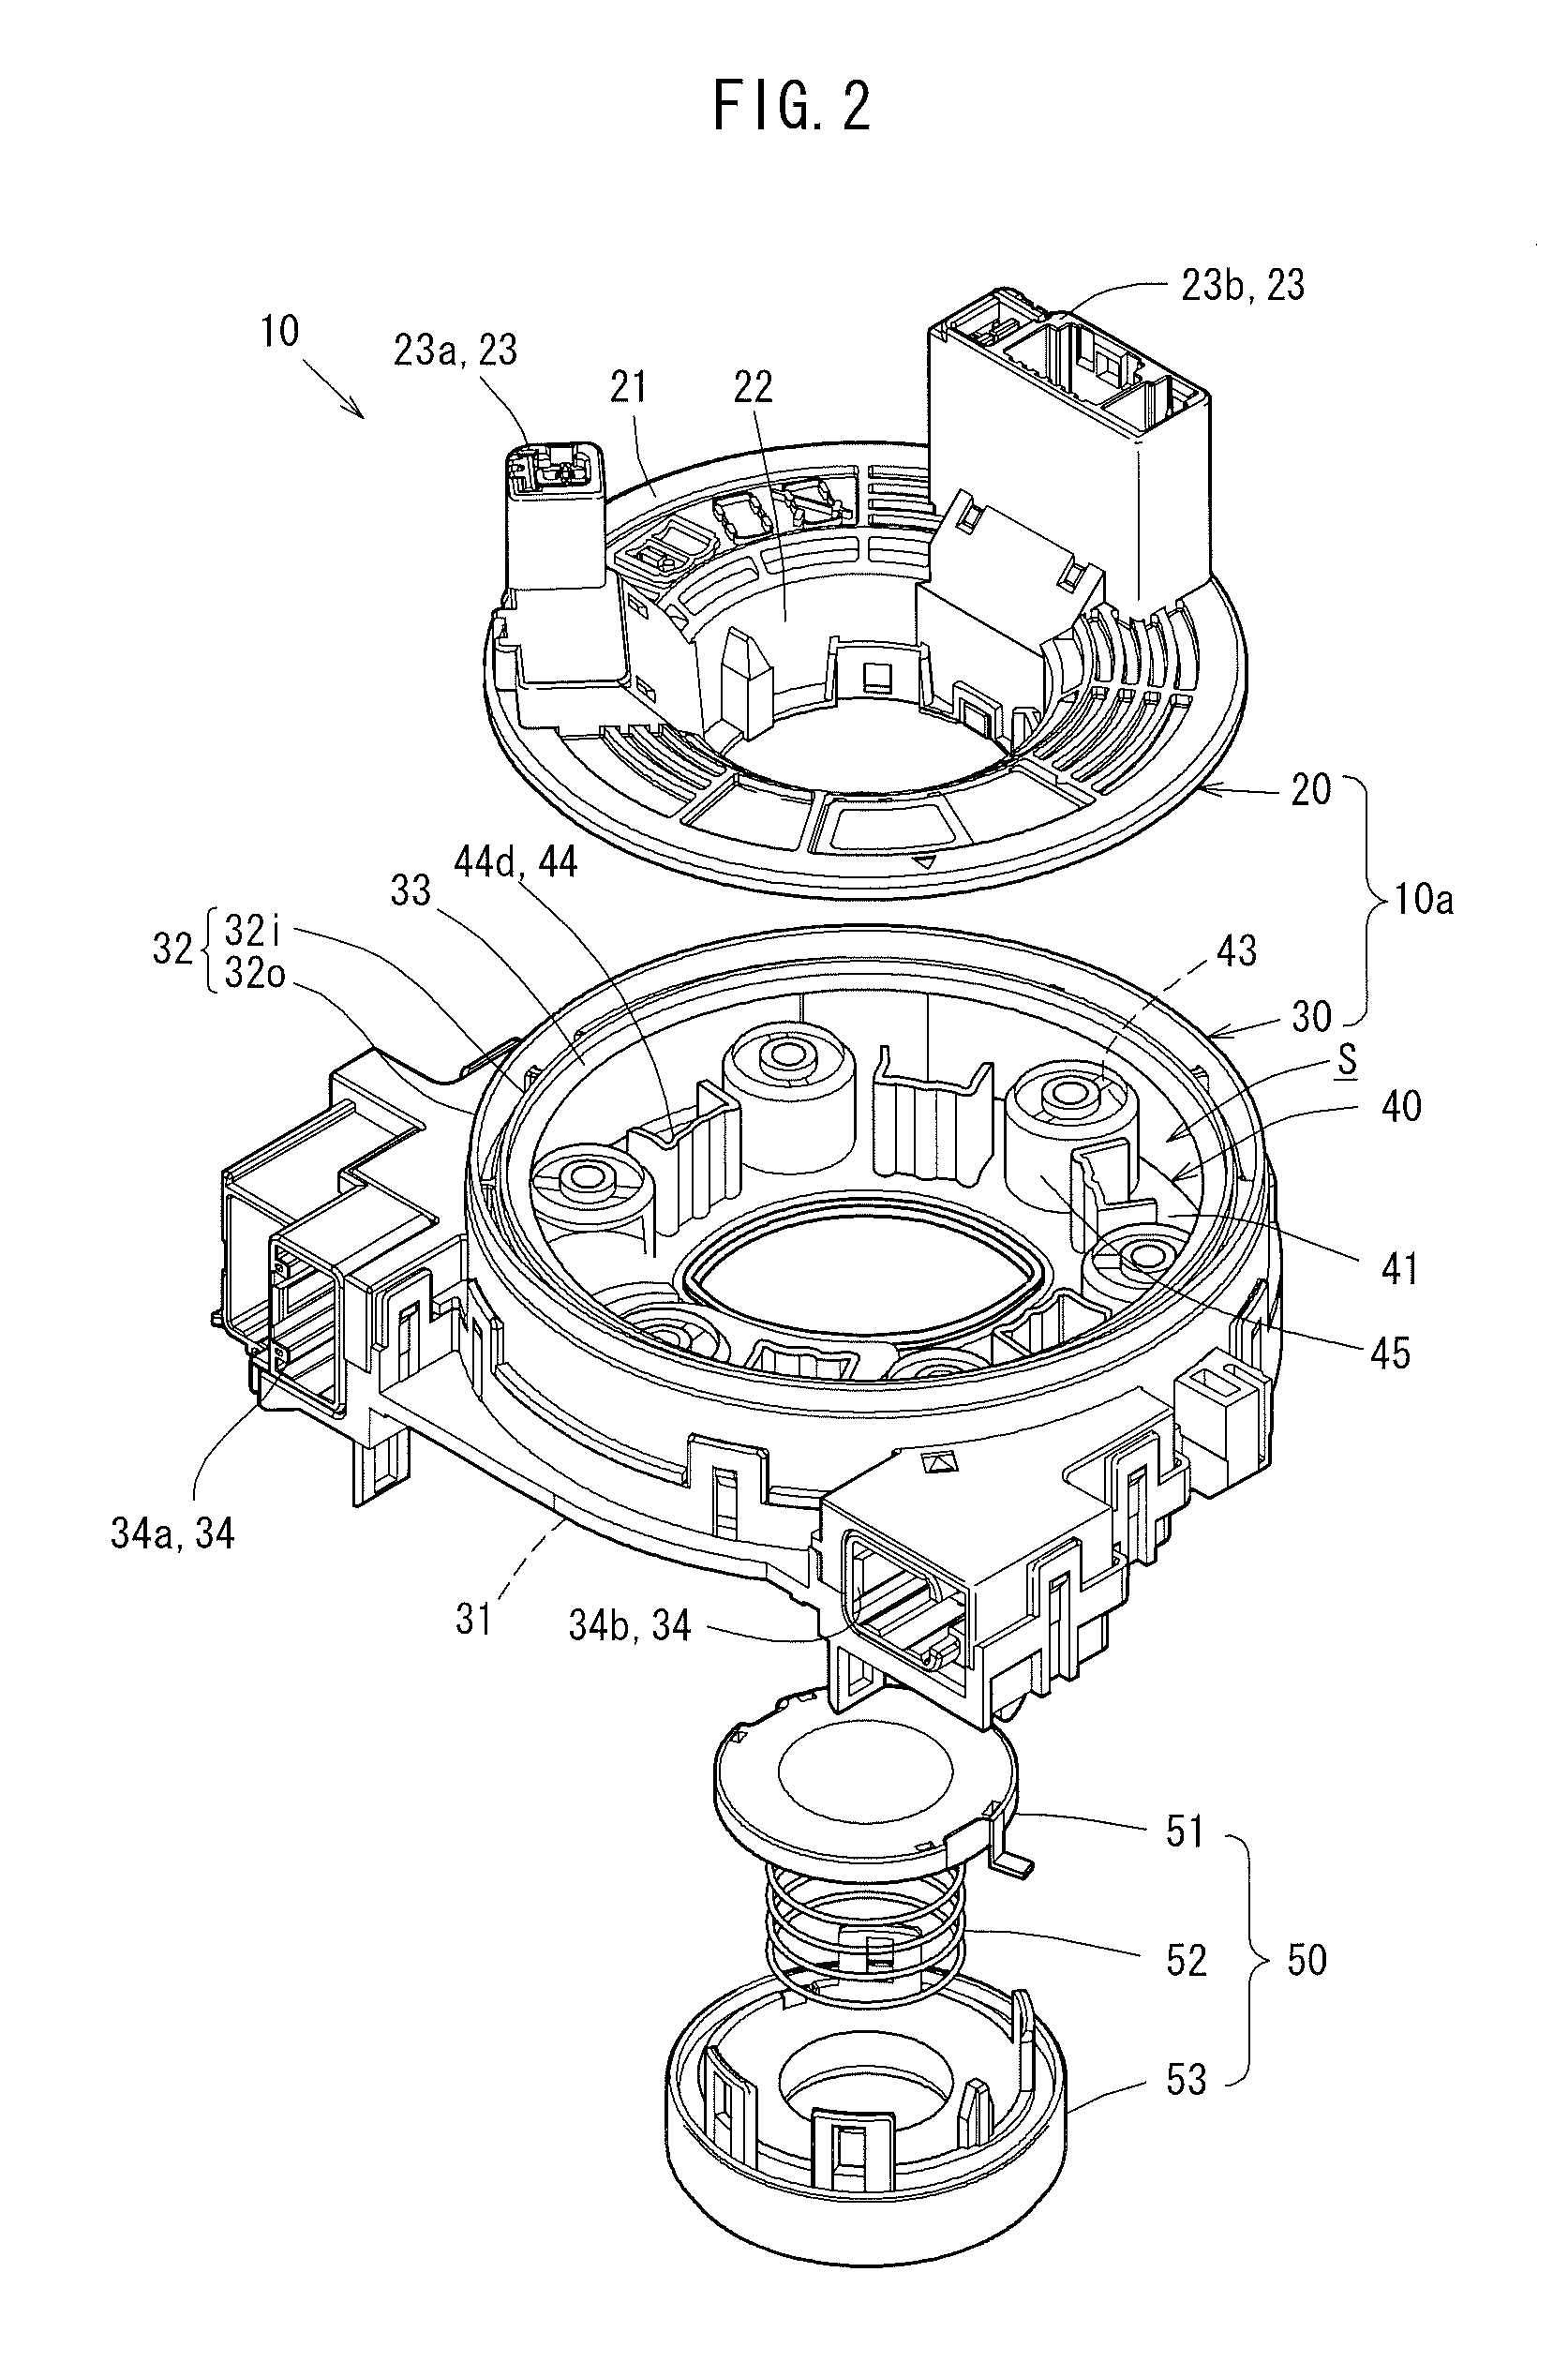 Rotatable connector device